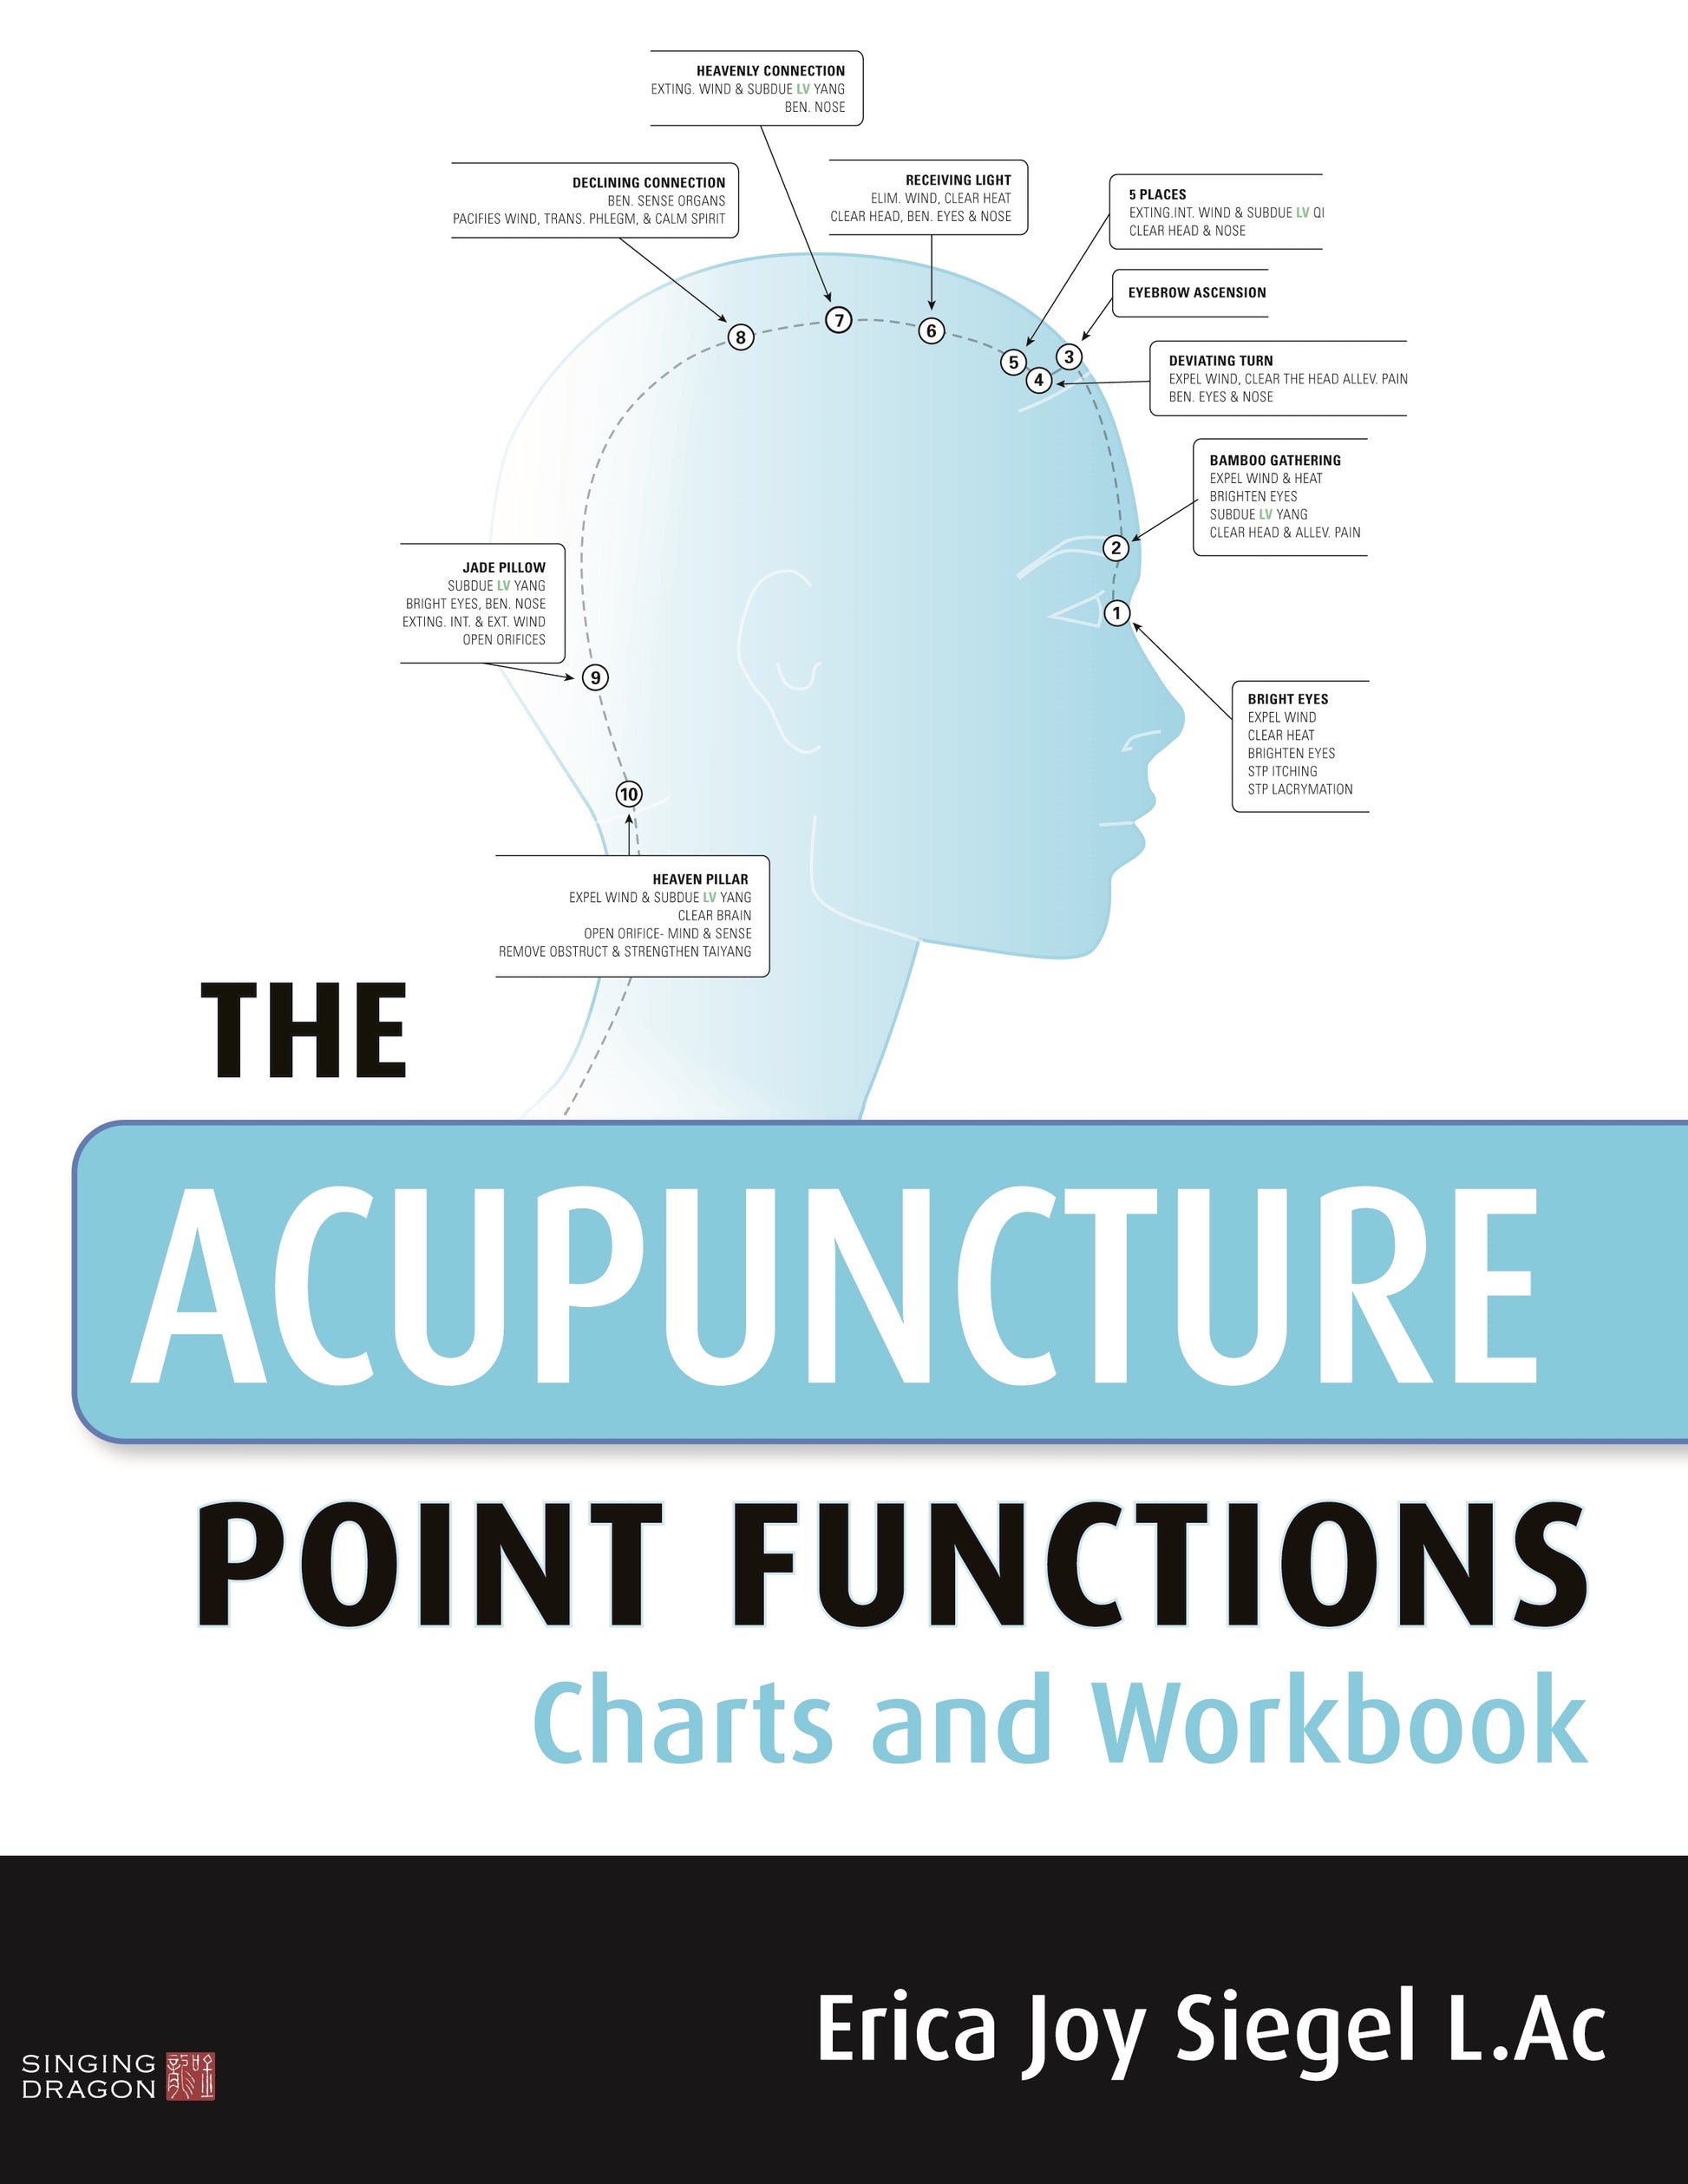 The Acupuncture Point Functions Charts and Workbook by Erica Siegel